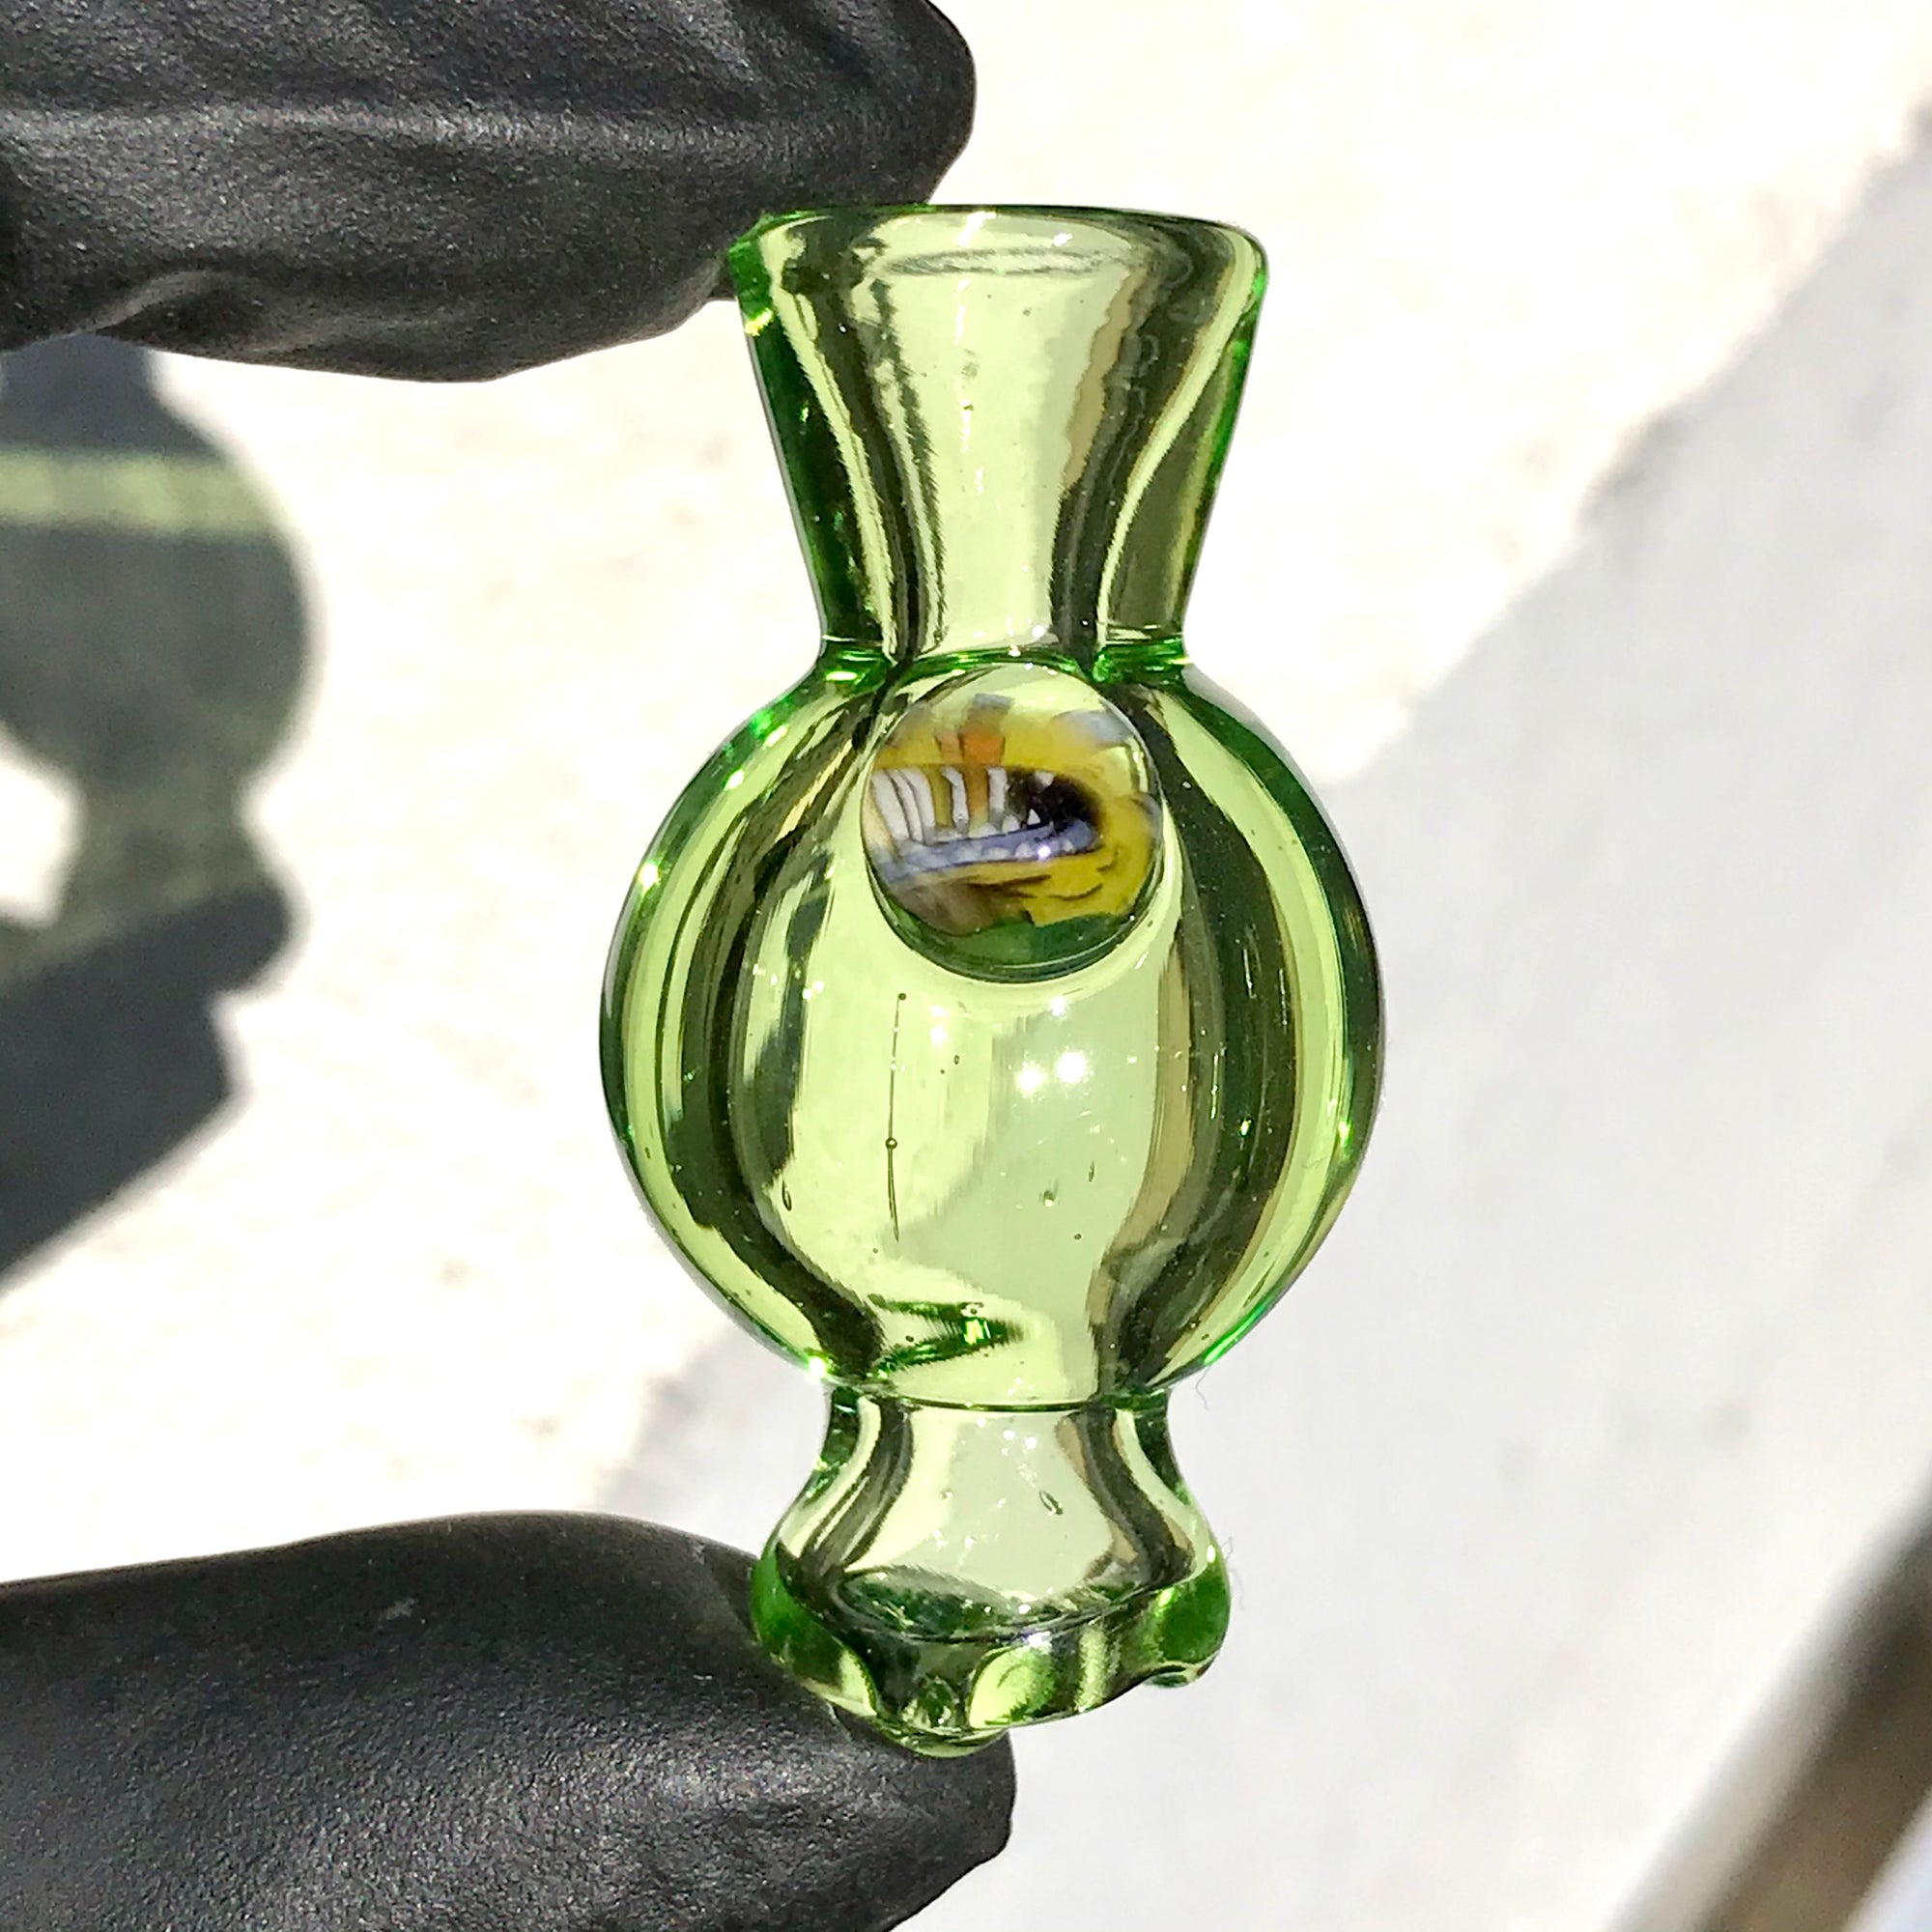 Hoyer Glass Spinner Cap with Milli Image and Matching Milli Terp Pearl (Haterade) show variant 